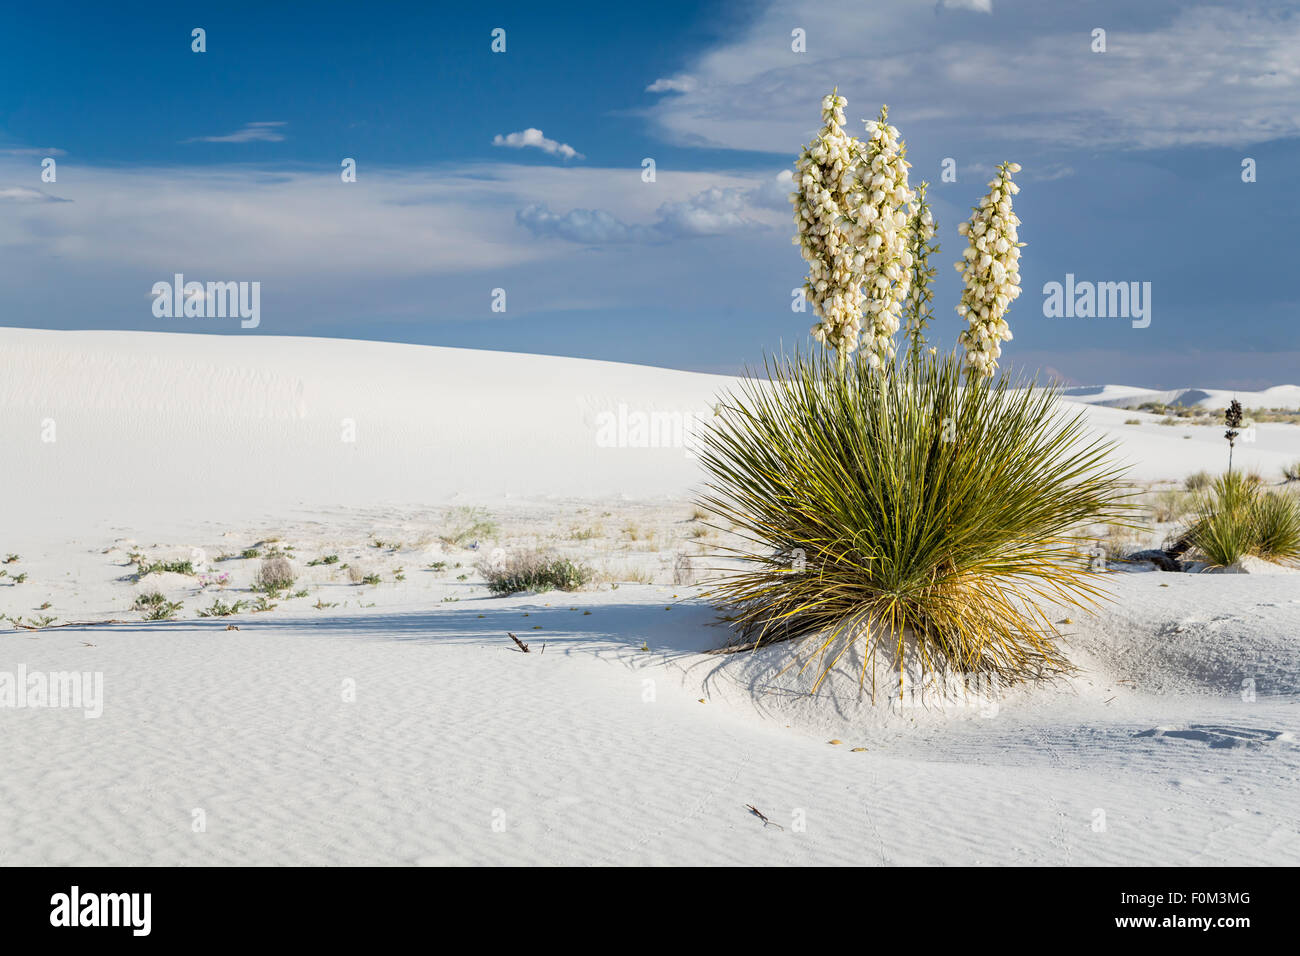 Blooming yucca plants in the white gypsum dunes of the White Sands National Monument near Alamogordo, New Mexico, USA. Stock Photo